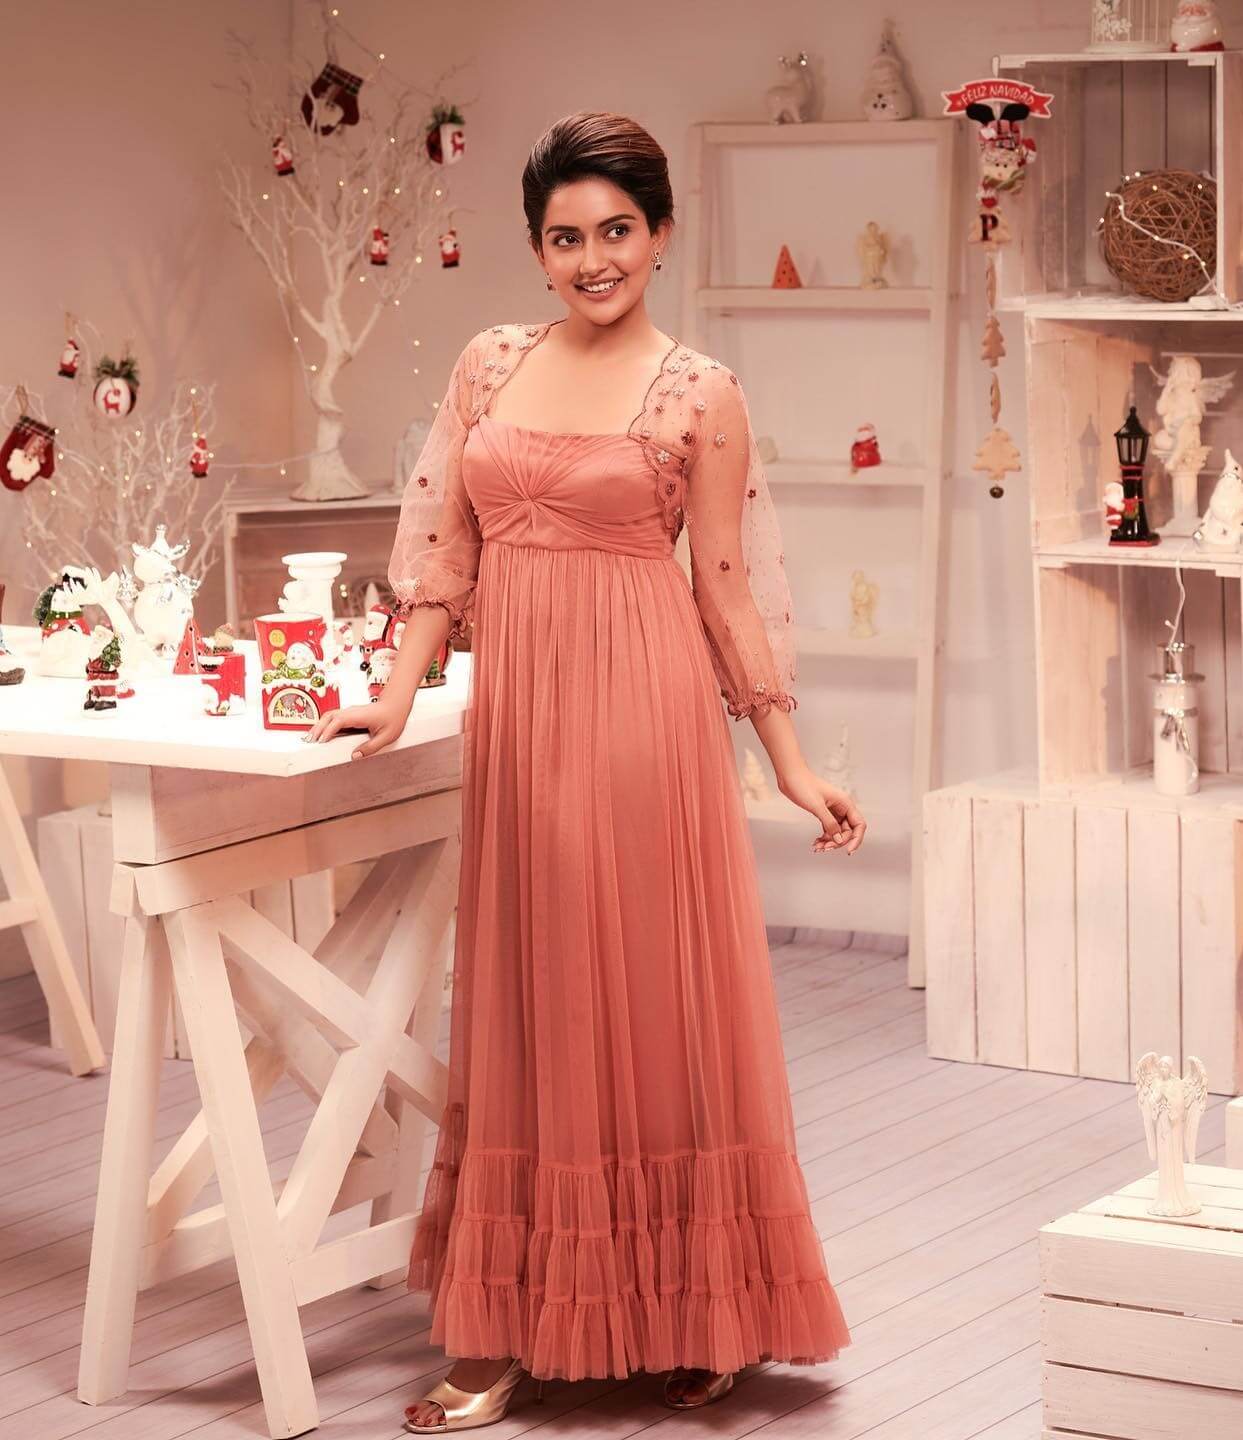 Mahima Nambiar  Drop-Dead Gorgeous Fabulous, Festive Outfits And Looks In Beige Fit & Flare Net Ruffled Dress With Sleek Hairstyle 